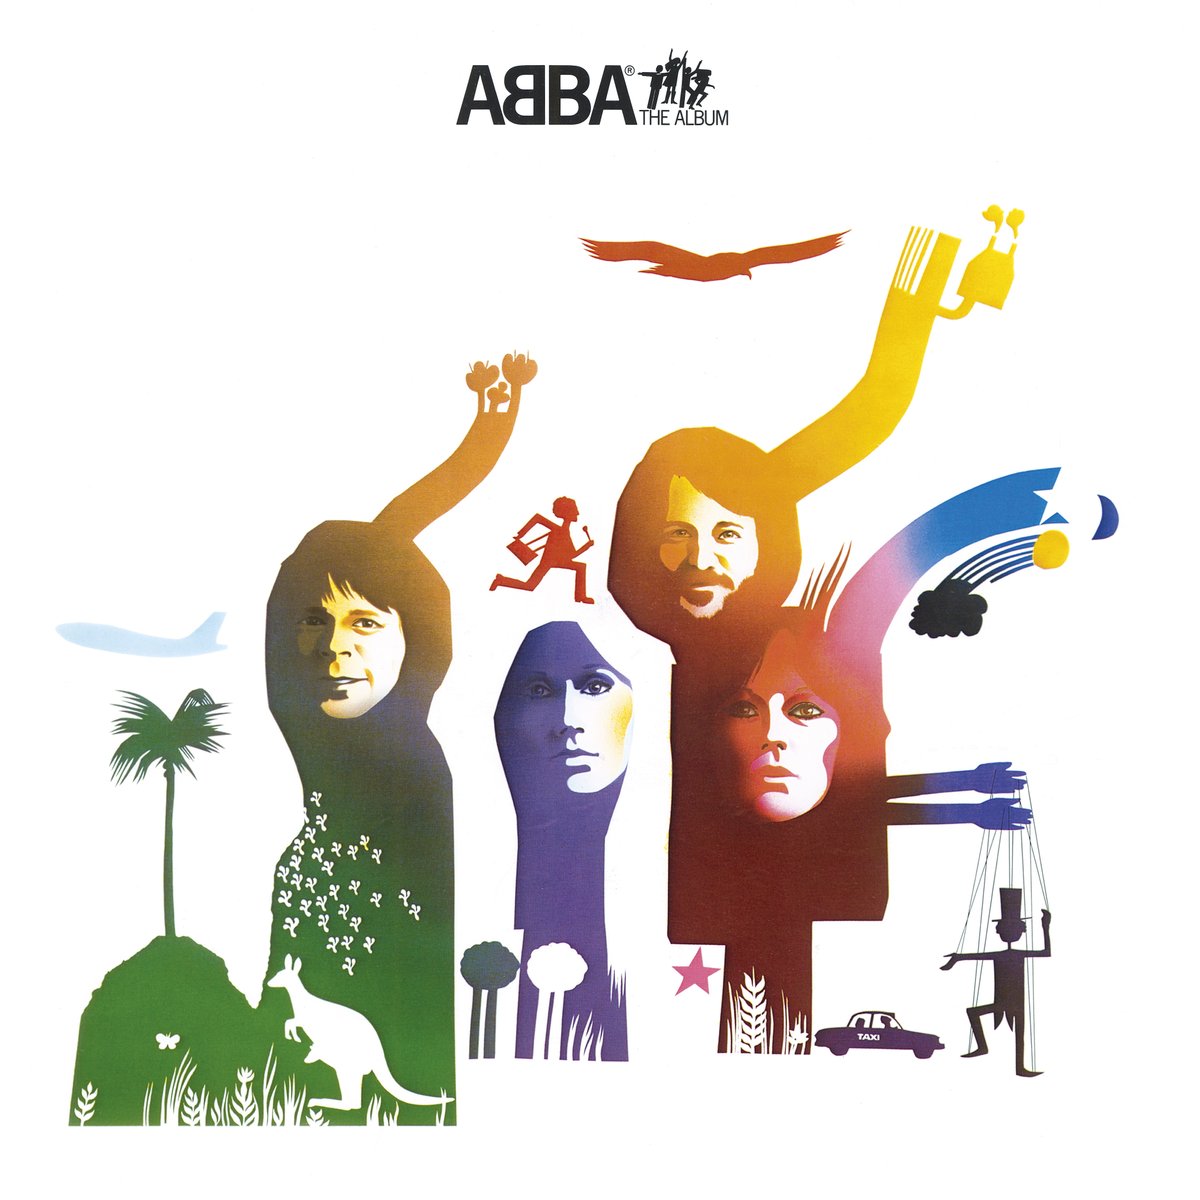 Today 'ABBA - The Album' turns 45! Released on this day back in 1977 it spawned hits such as 'Take A Chance On Me', 'Thank You For The Music' and 'The Name Of The Game'. #ABBAFacts #ABBA